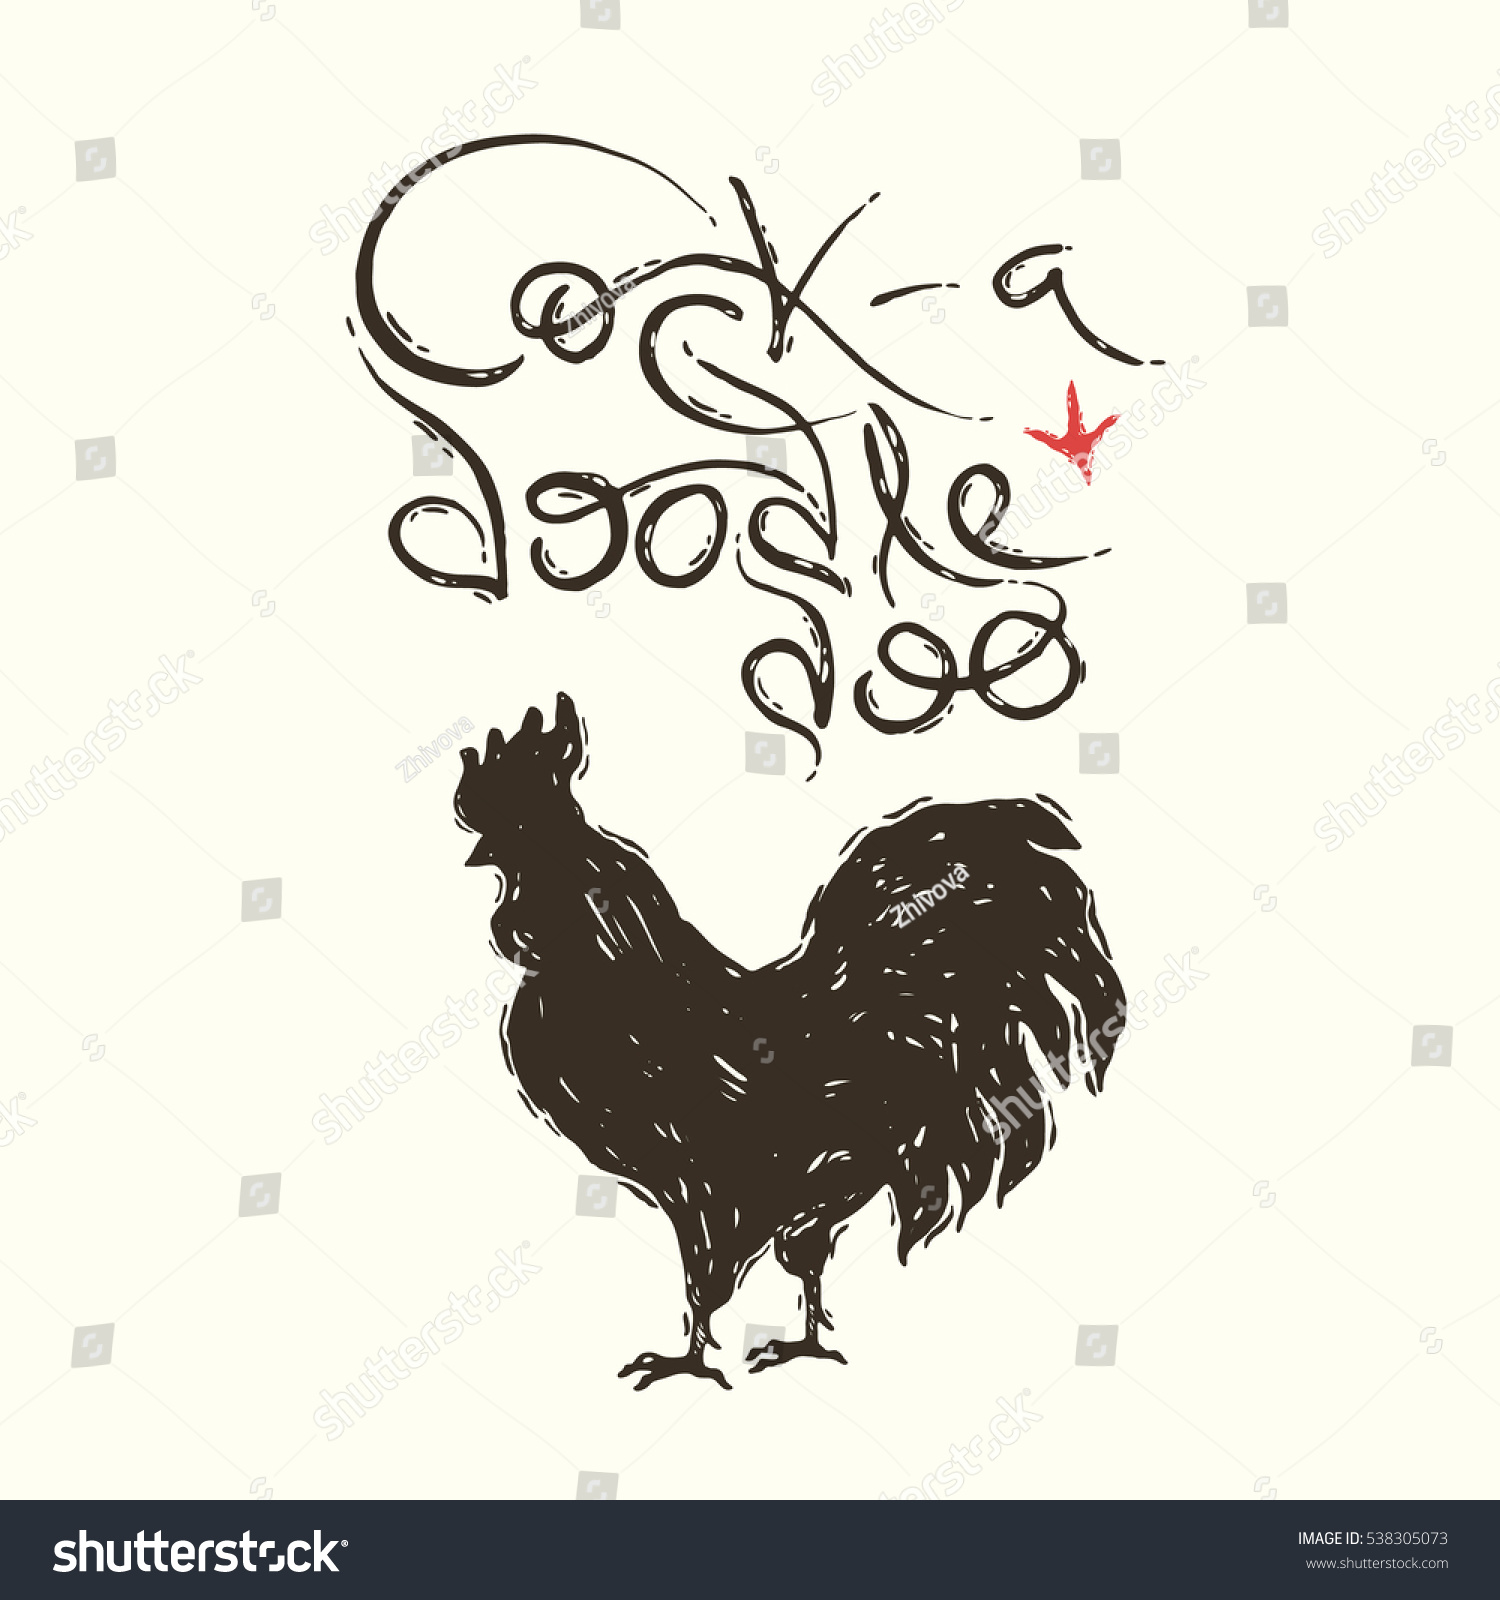 SVG of Hand drawn illustration of the rooster with inscription Cock-a-Doodle-Doo svg